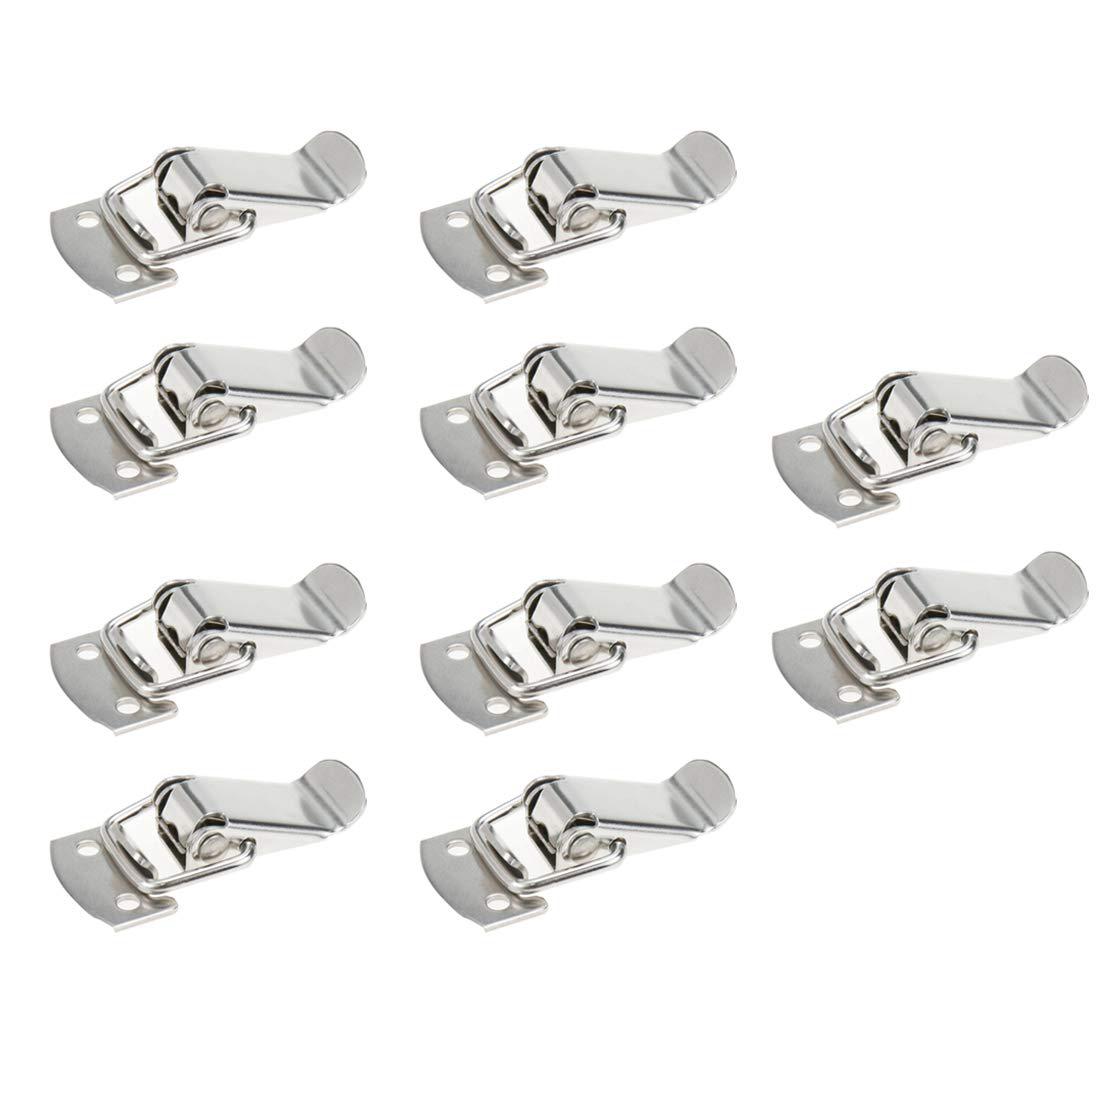 rannb toggle latch mini size stainless steel latch catches clamp for toolbox, cases, chests - pack of 10